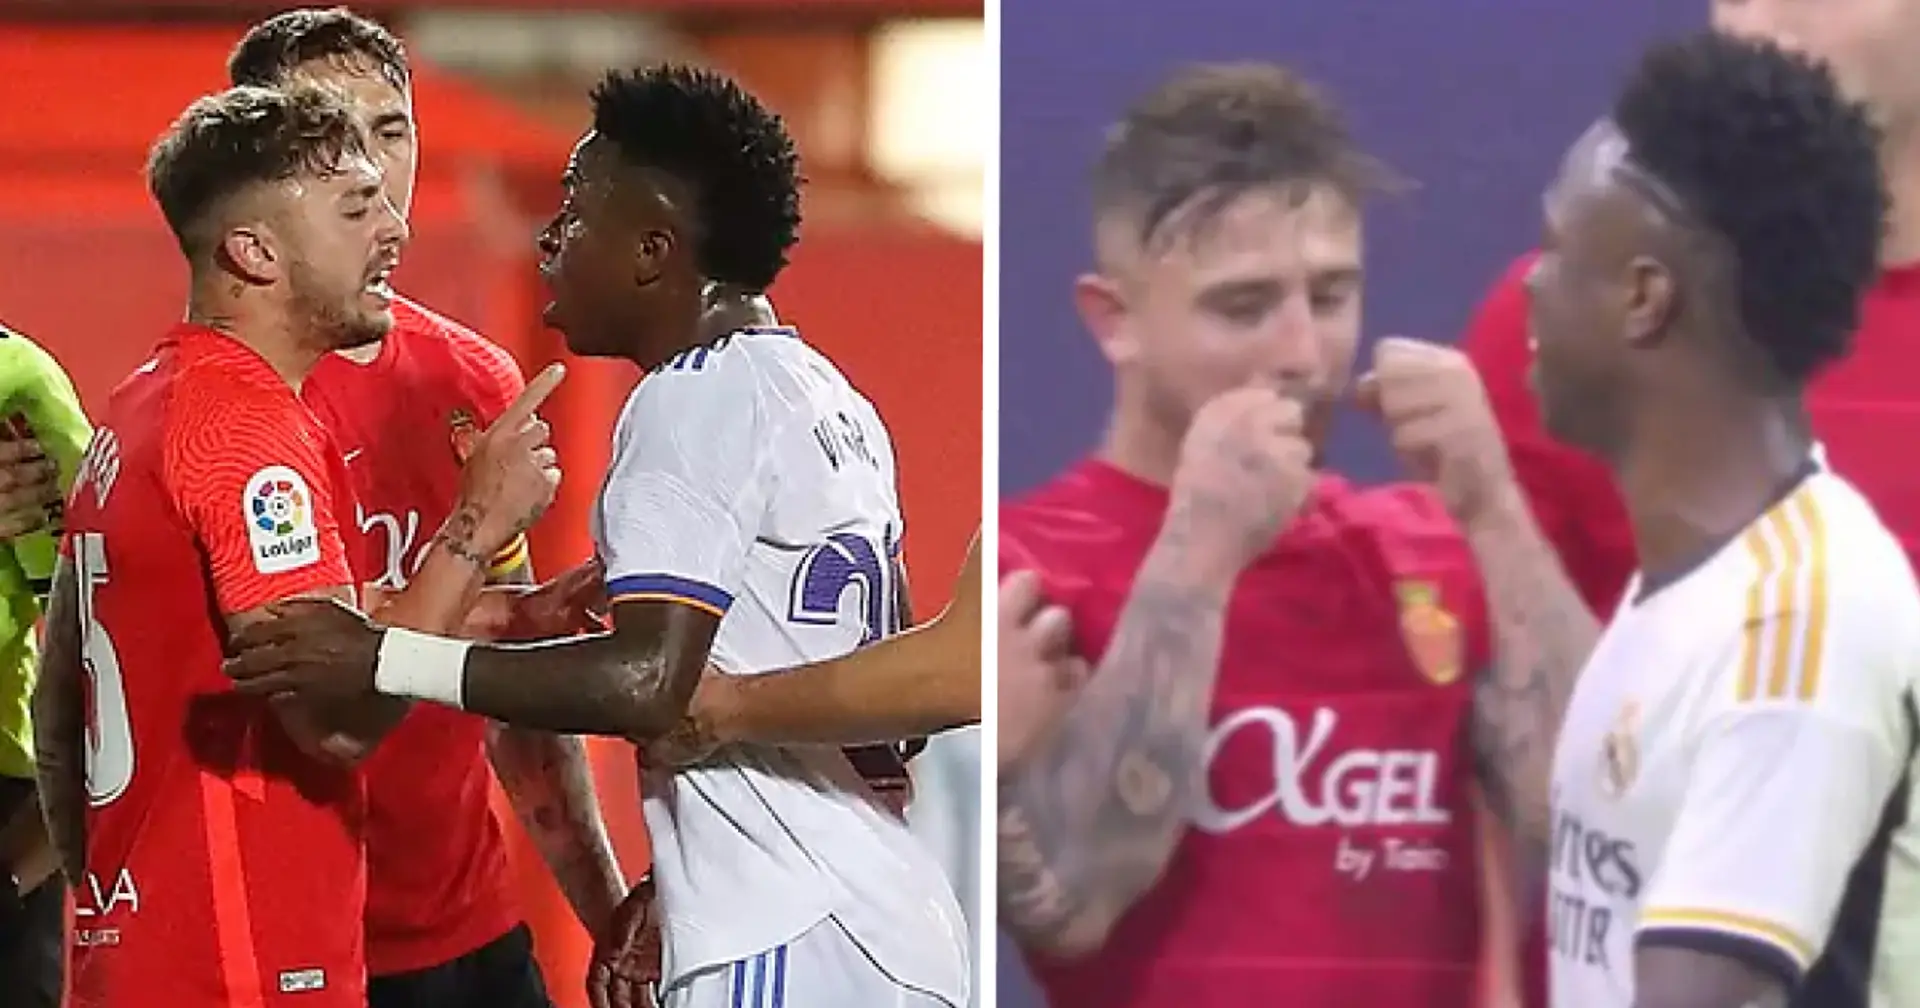 Caught on camera: Mallorca defender mocks Vinicius with insulting gesture – he did it last season